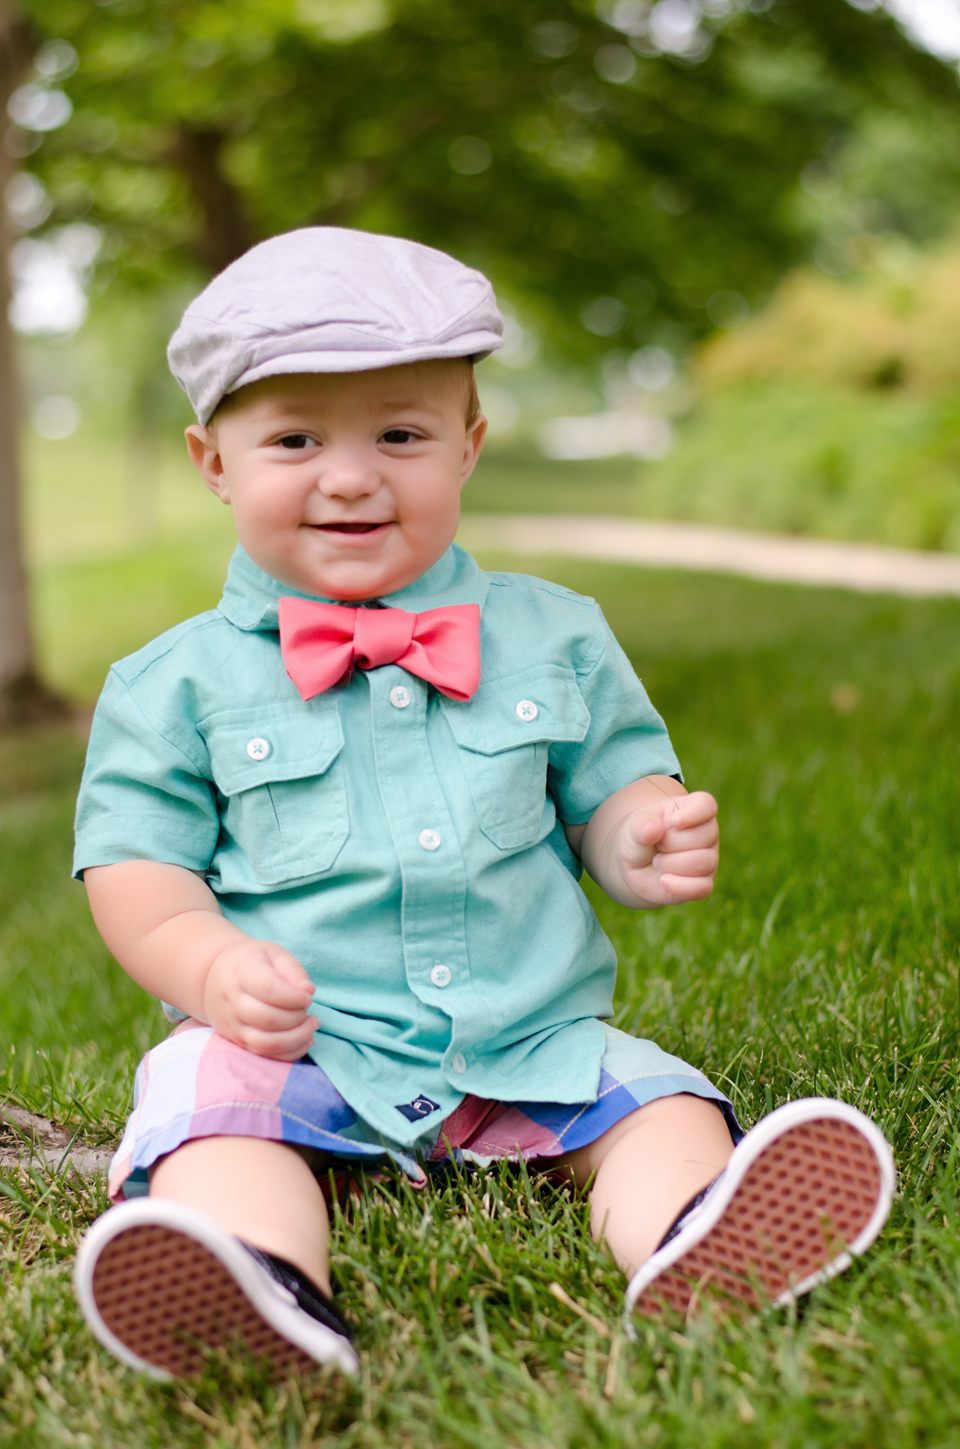 Miles | 10 months - Sporting his new outfit picked out by Bethany and the hand-made coral bowtie I diy for this session - My favorite shot